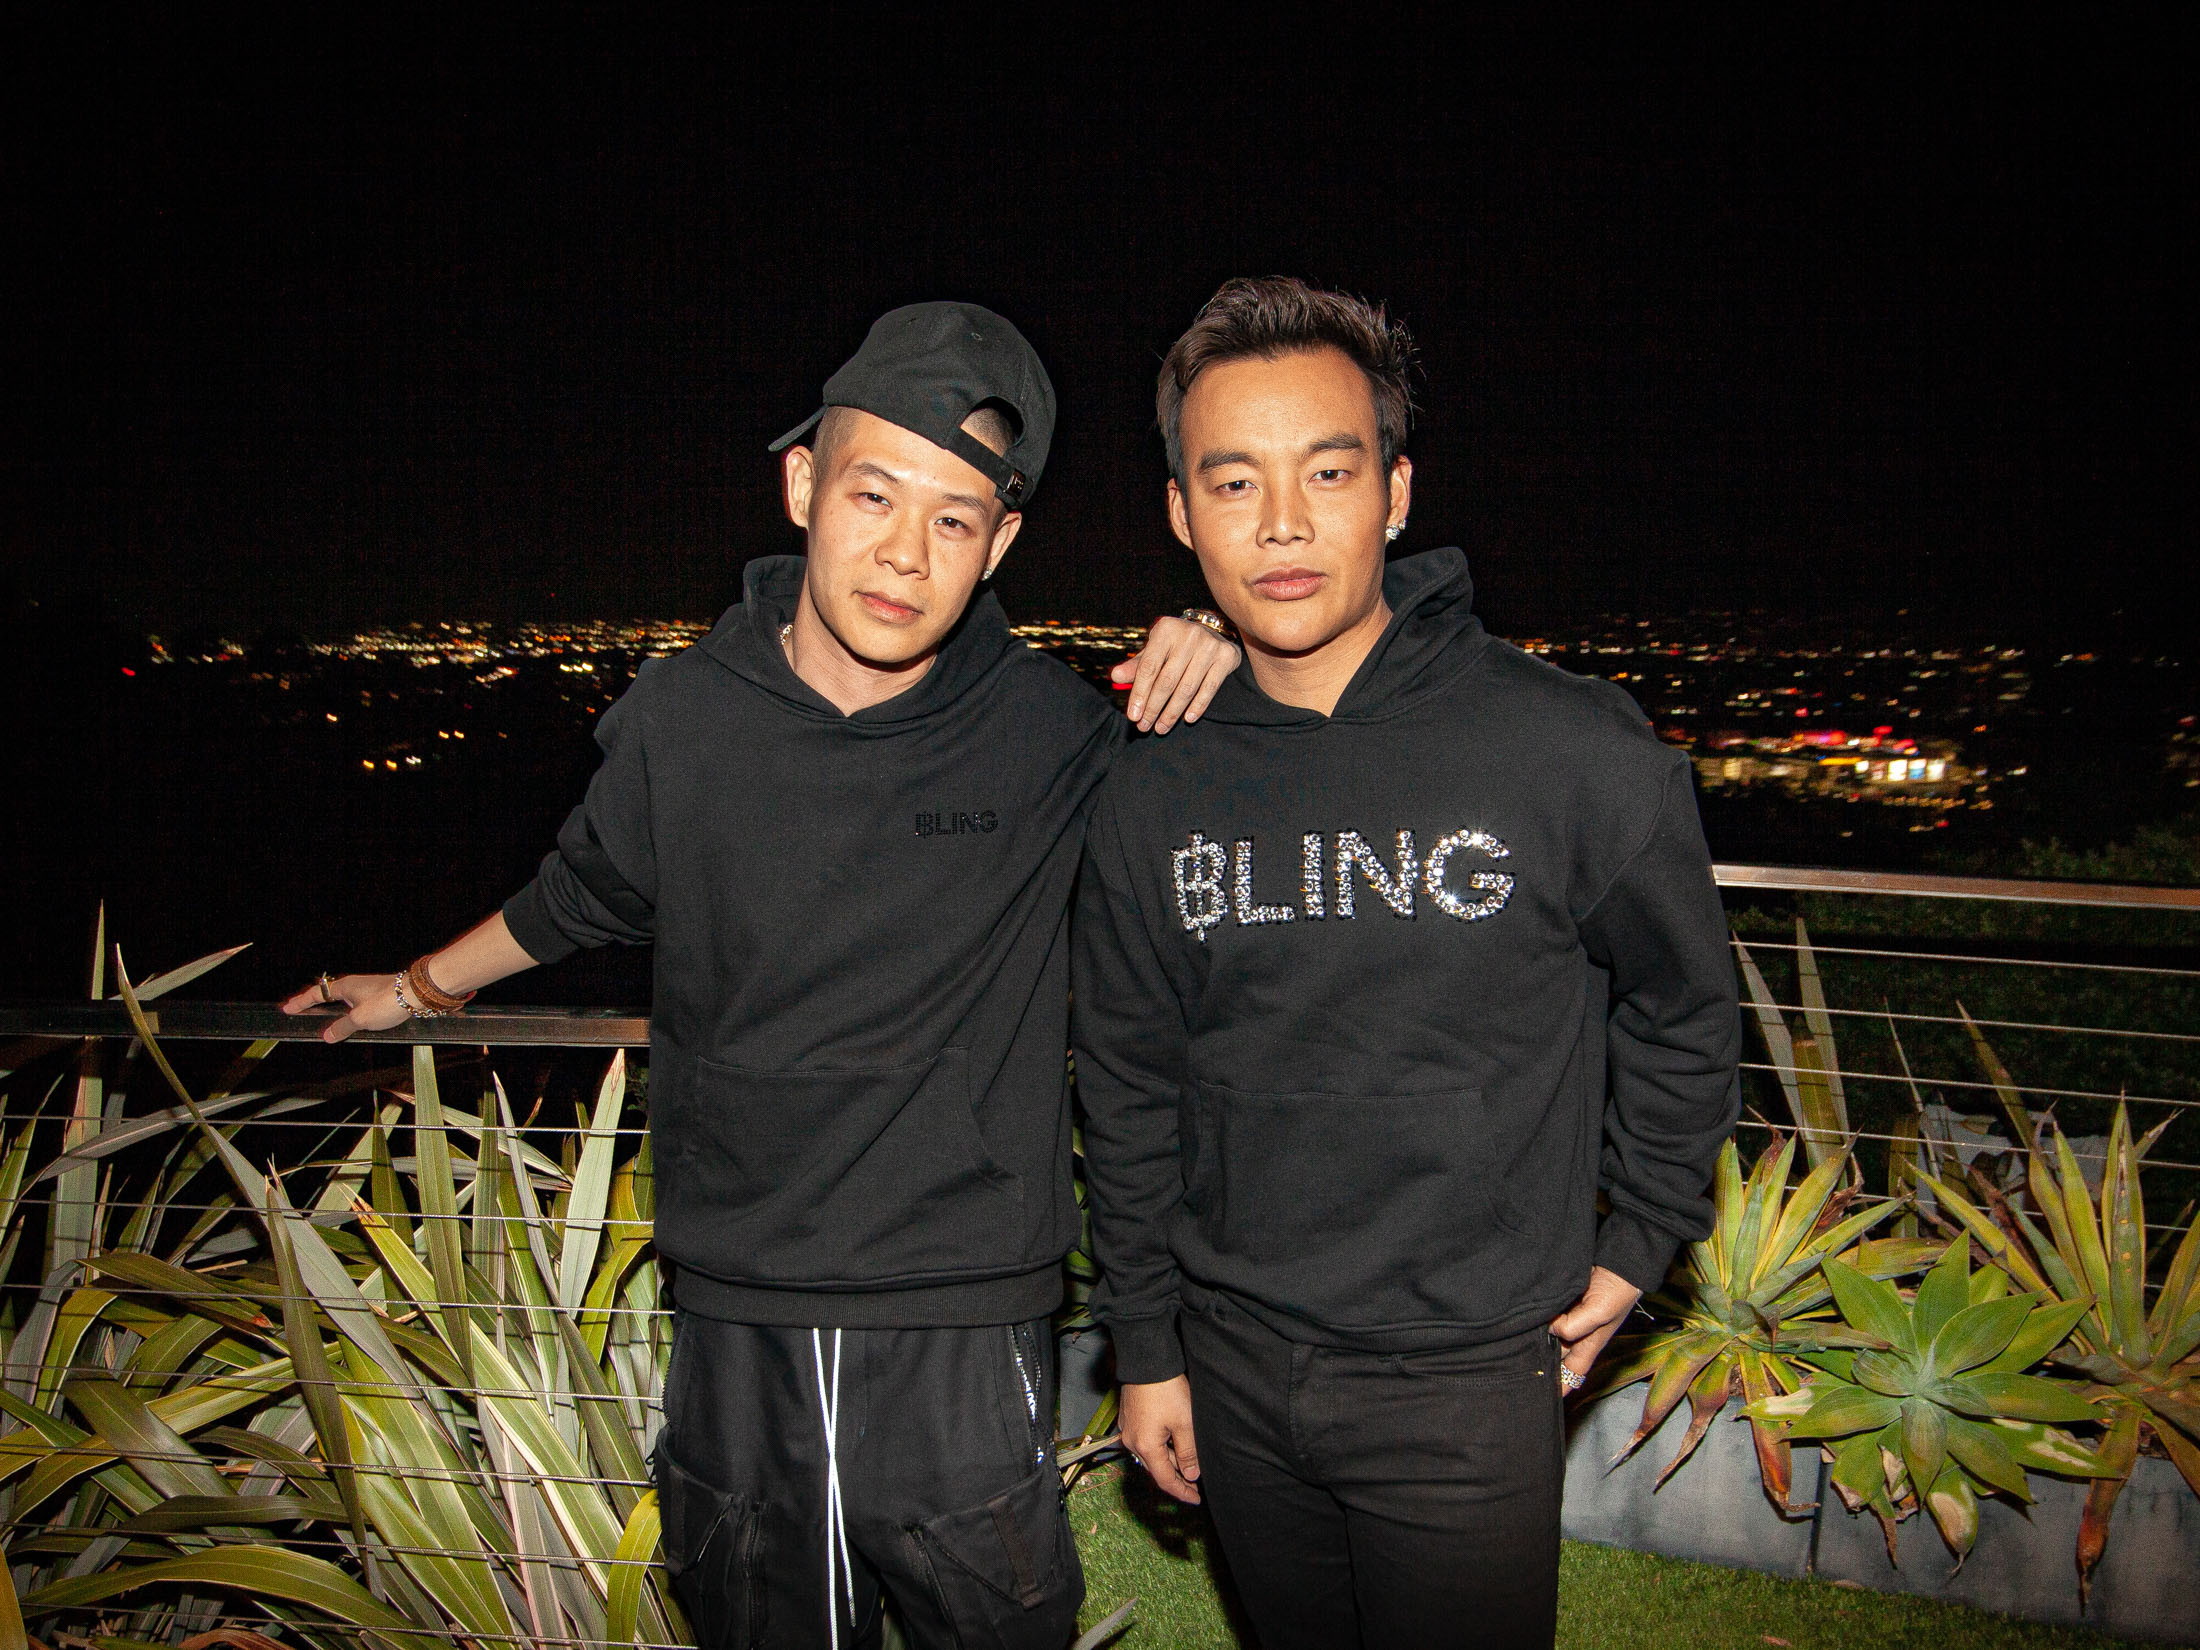 Bling Charity - Bloomberg Kane Lim With Star Empire Line Streetwear Angle Launches a a